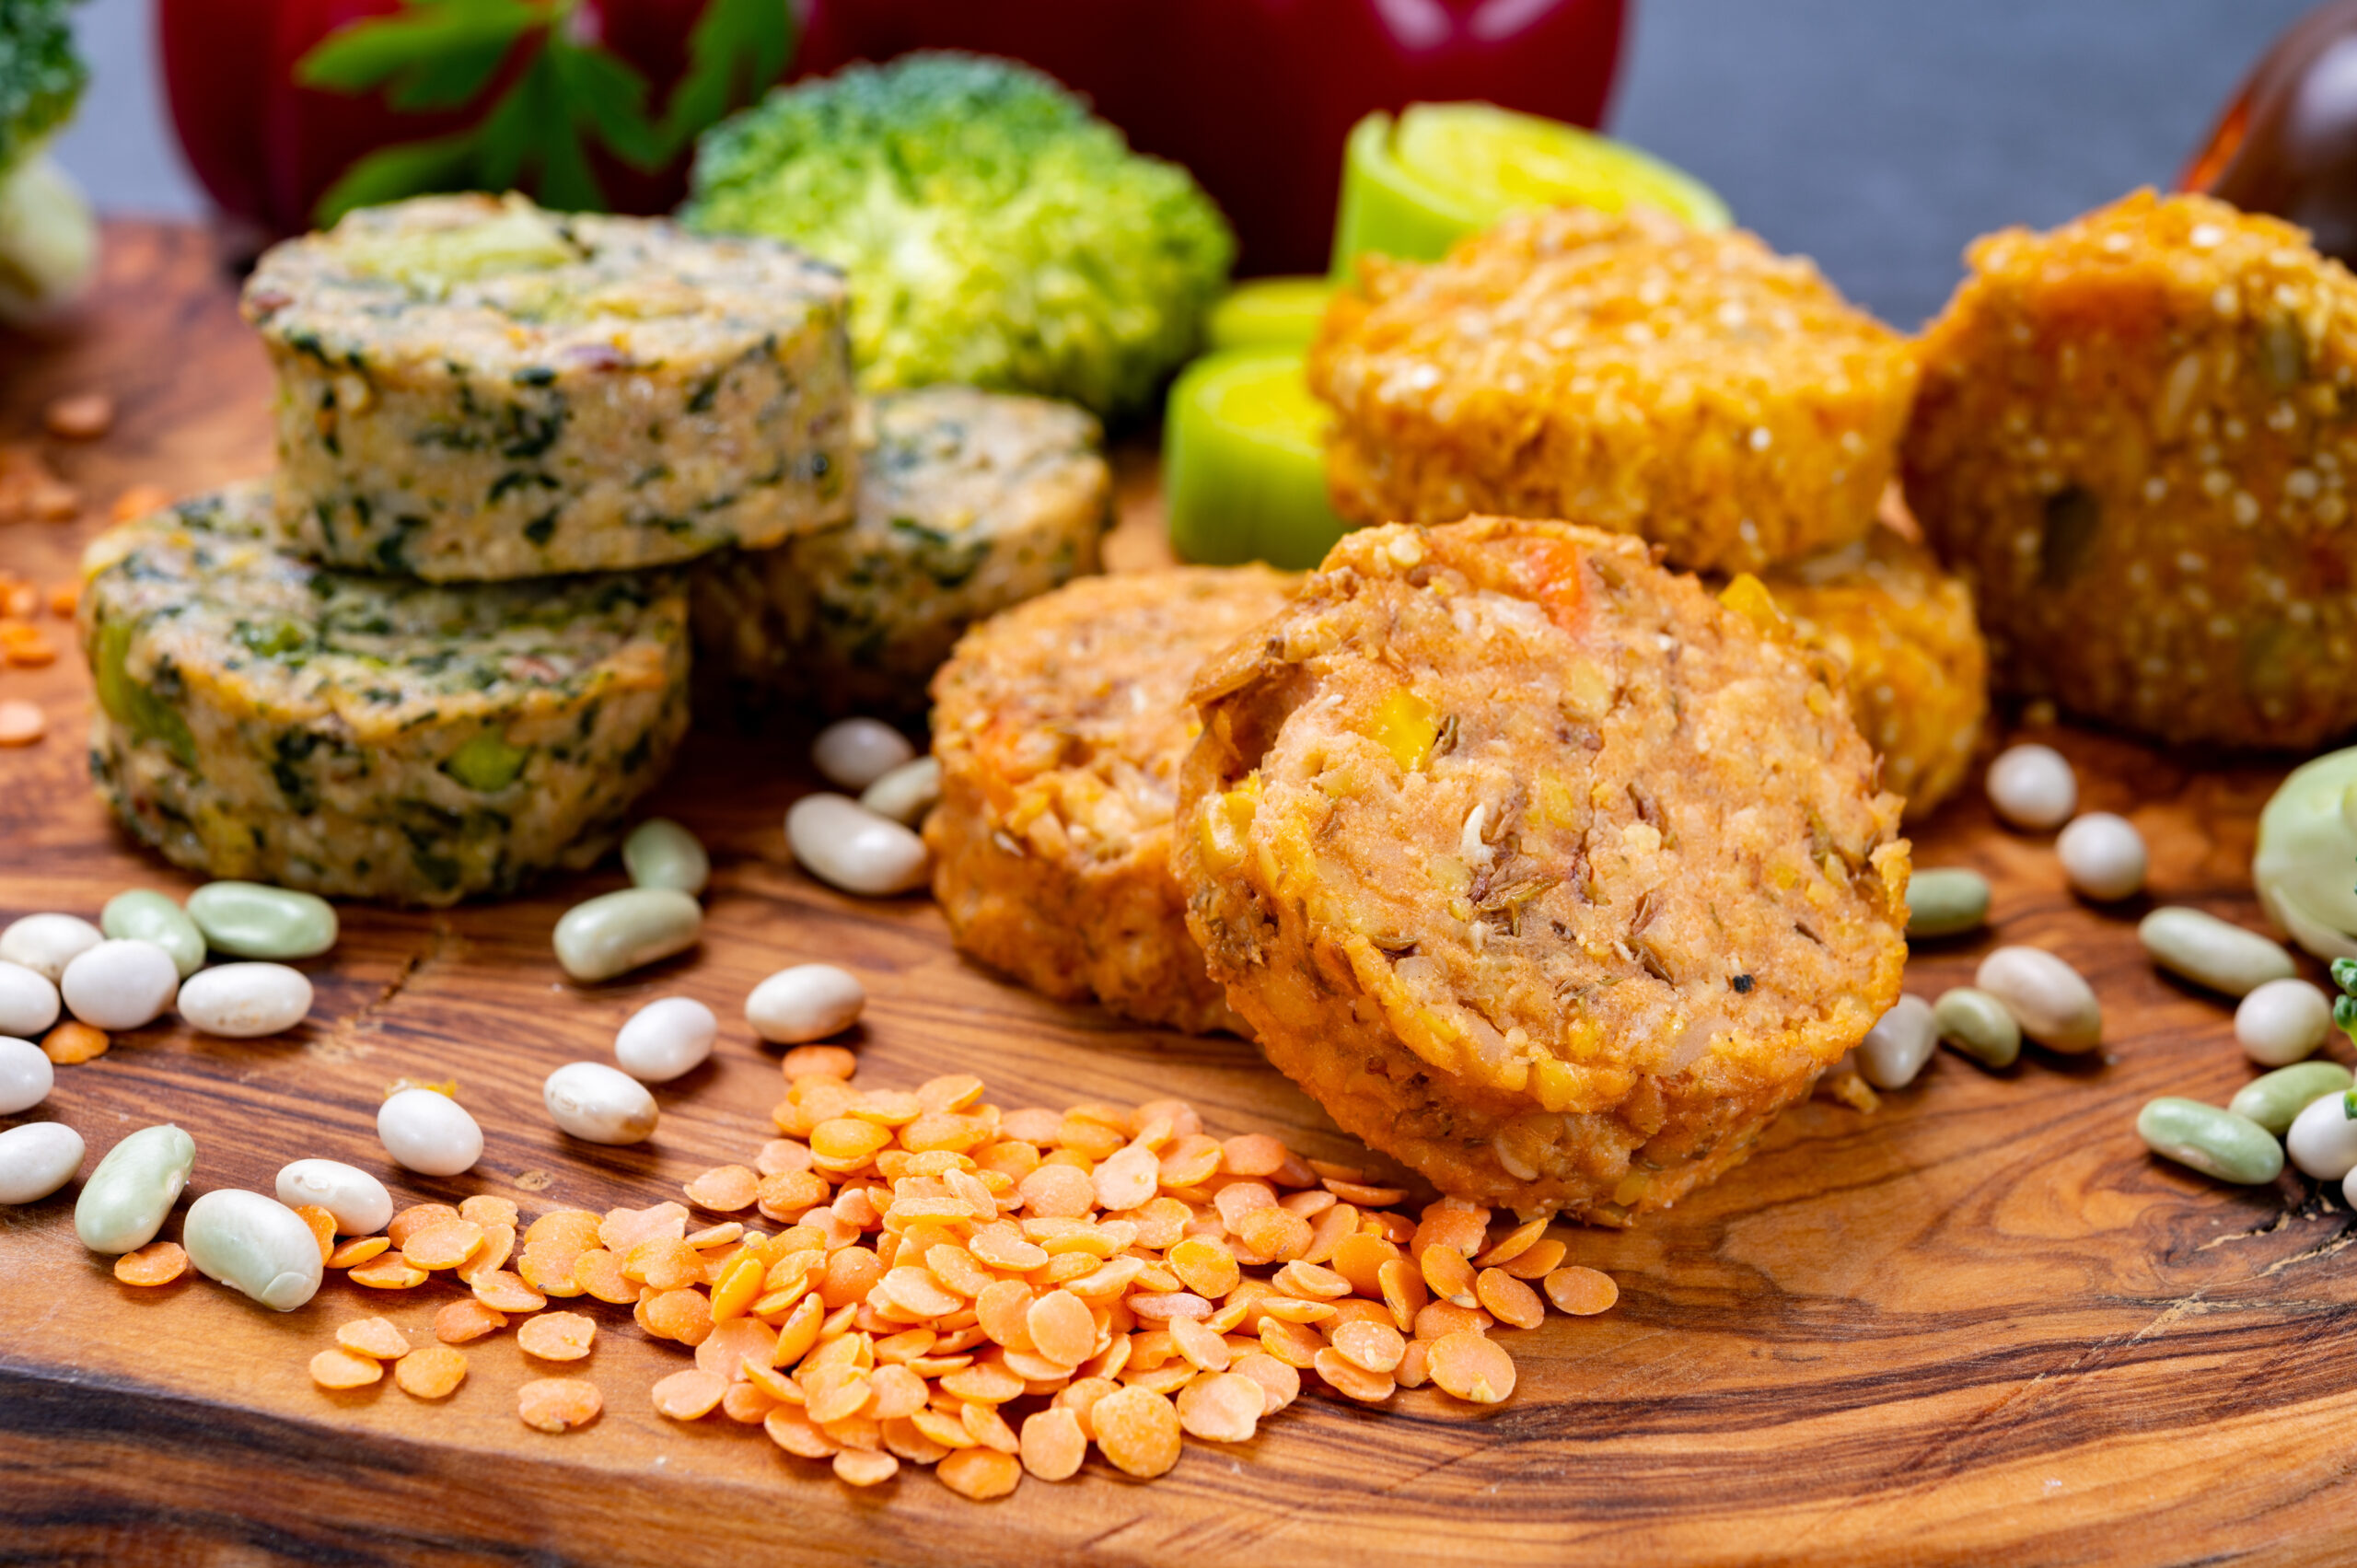 Plant-based food sales: Europe’s fastest-growing vegan product